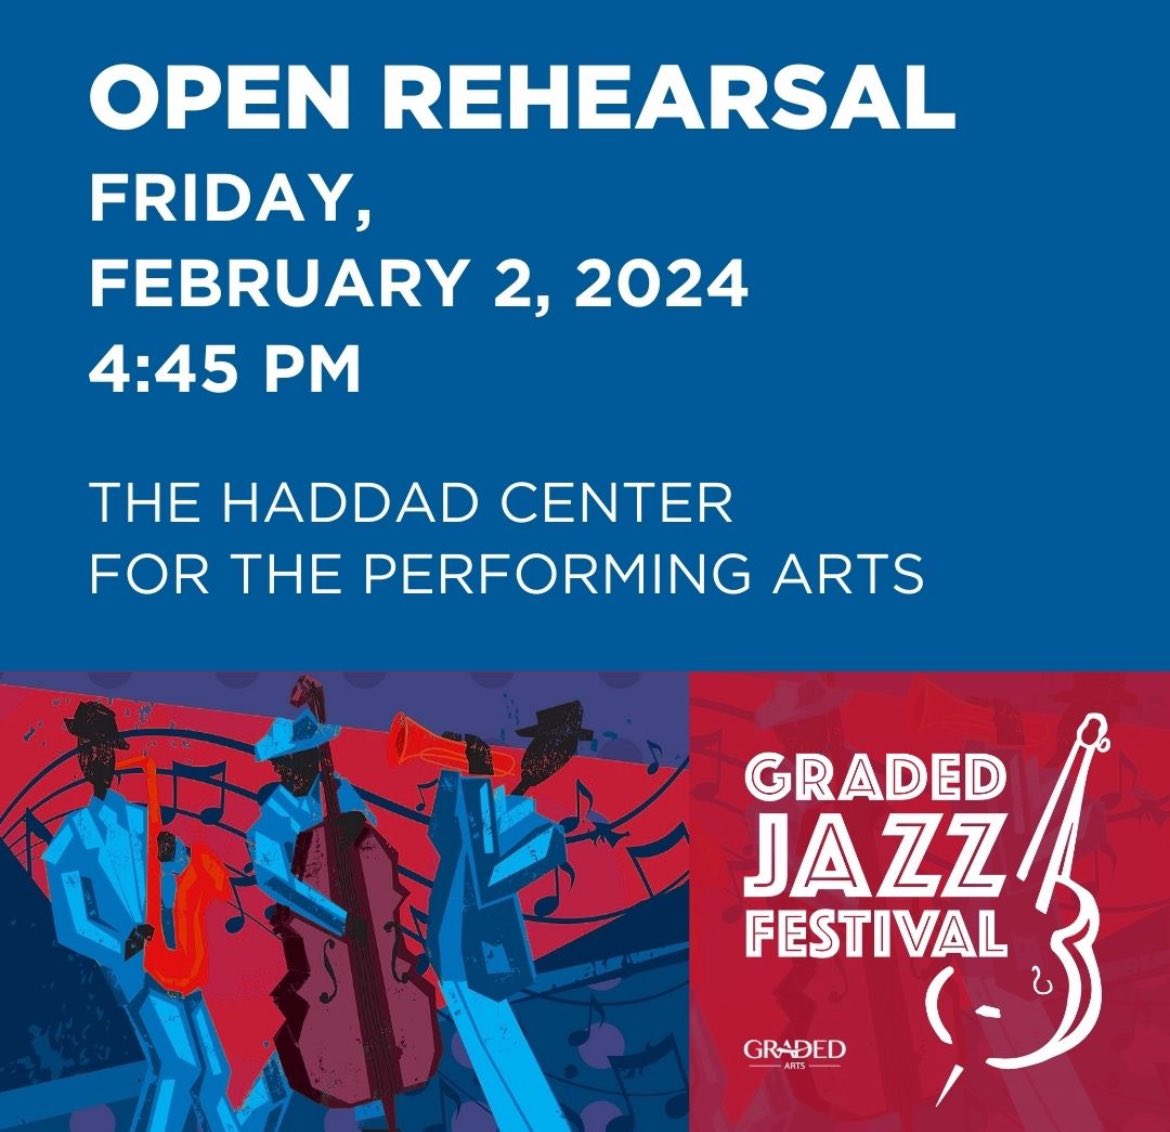 The 20th Graded Jazz Festival starts today! #music #musiced #jazz #jazzed #performingarts